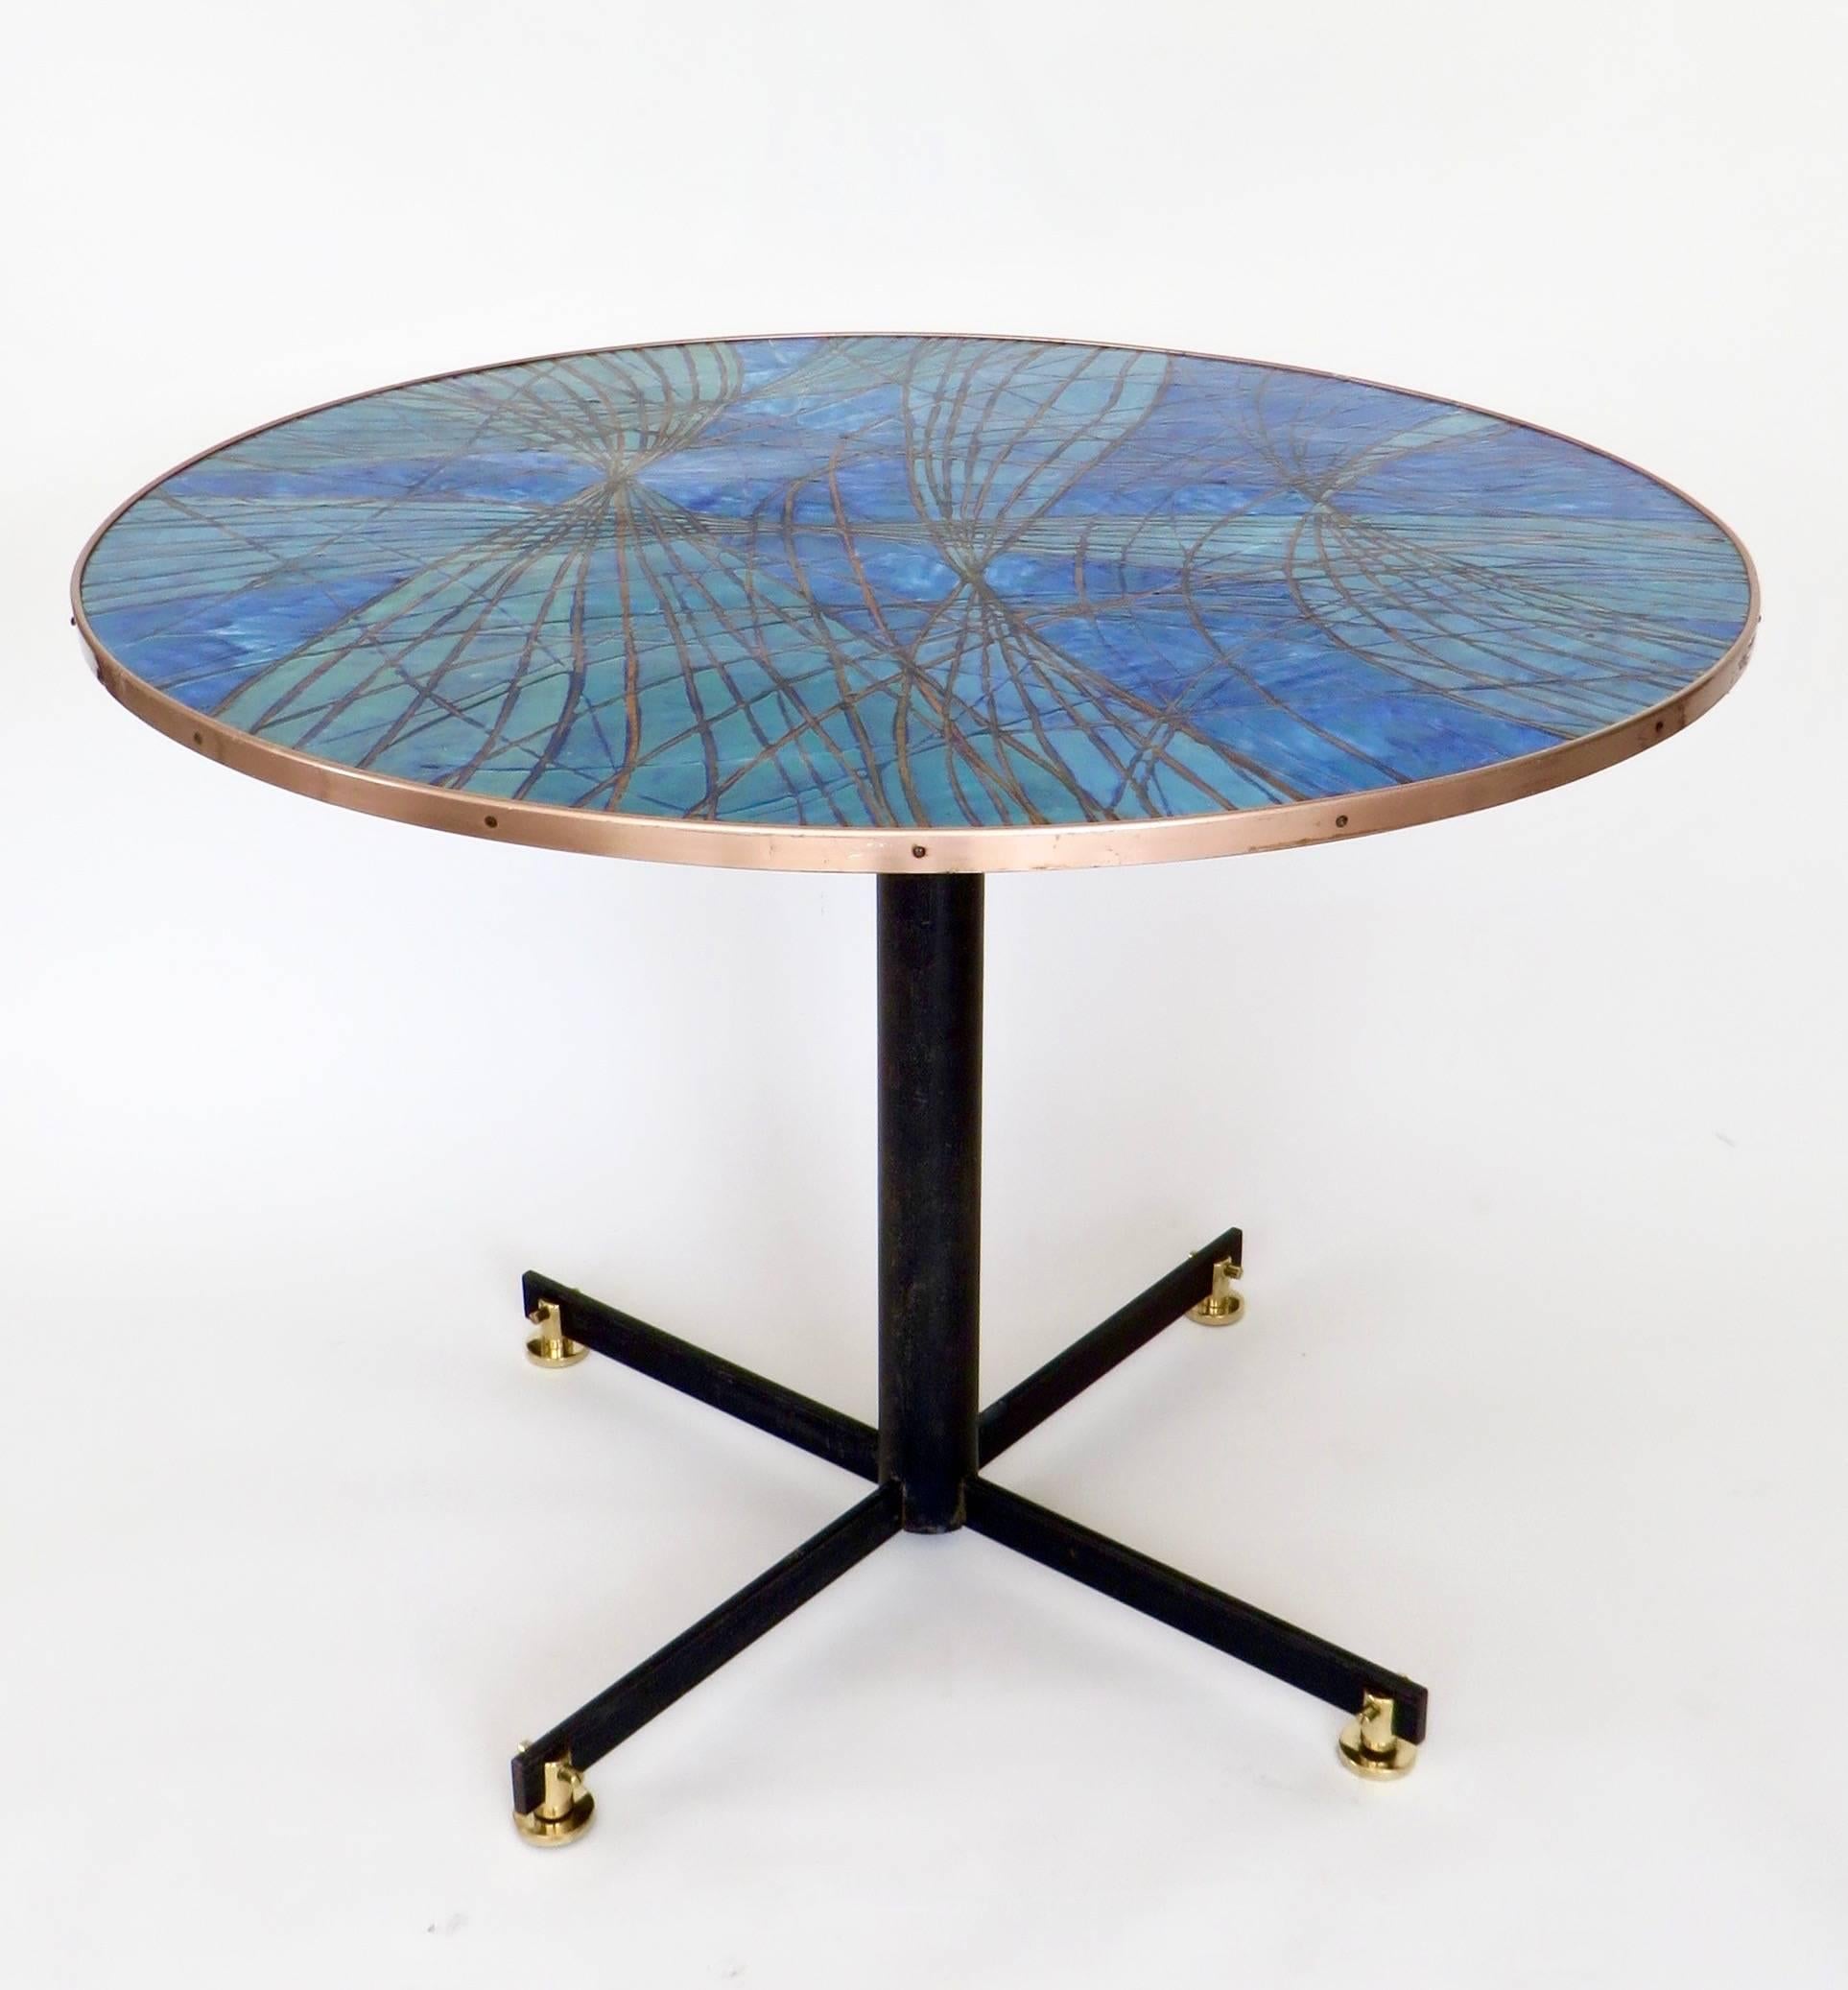 An Italian abstract pattern of enameled gold on Capri blue enamel copper top Italian dining or centre table on amazing black steel legs ending in brass levelling feet. Very Borsani or Albini feet.
A very high quality enamel work that is very